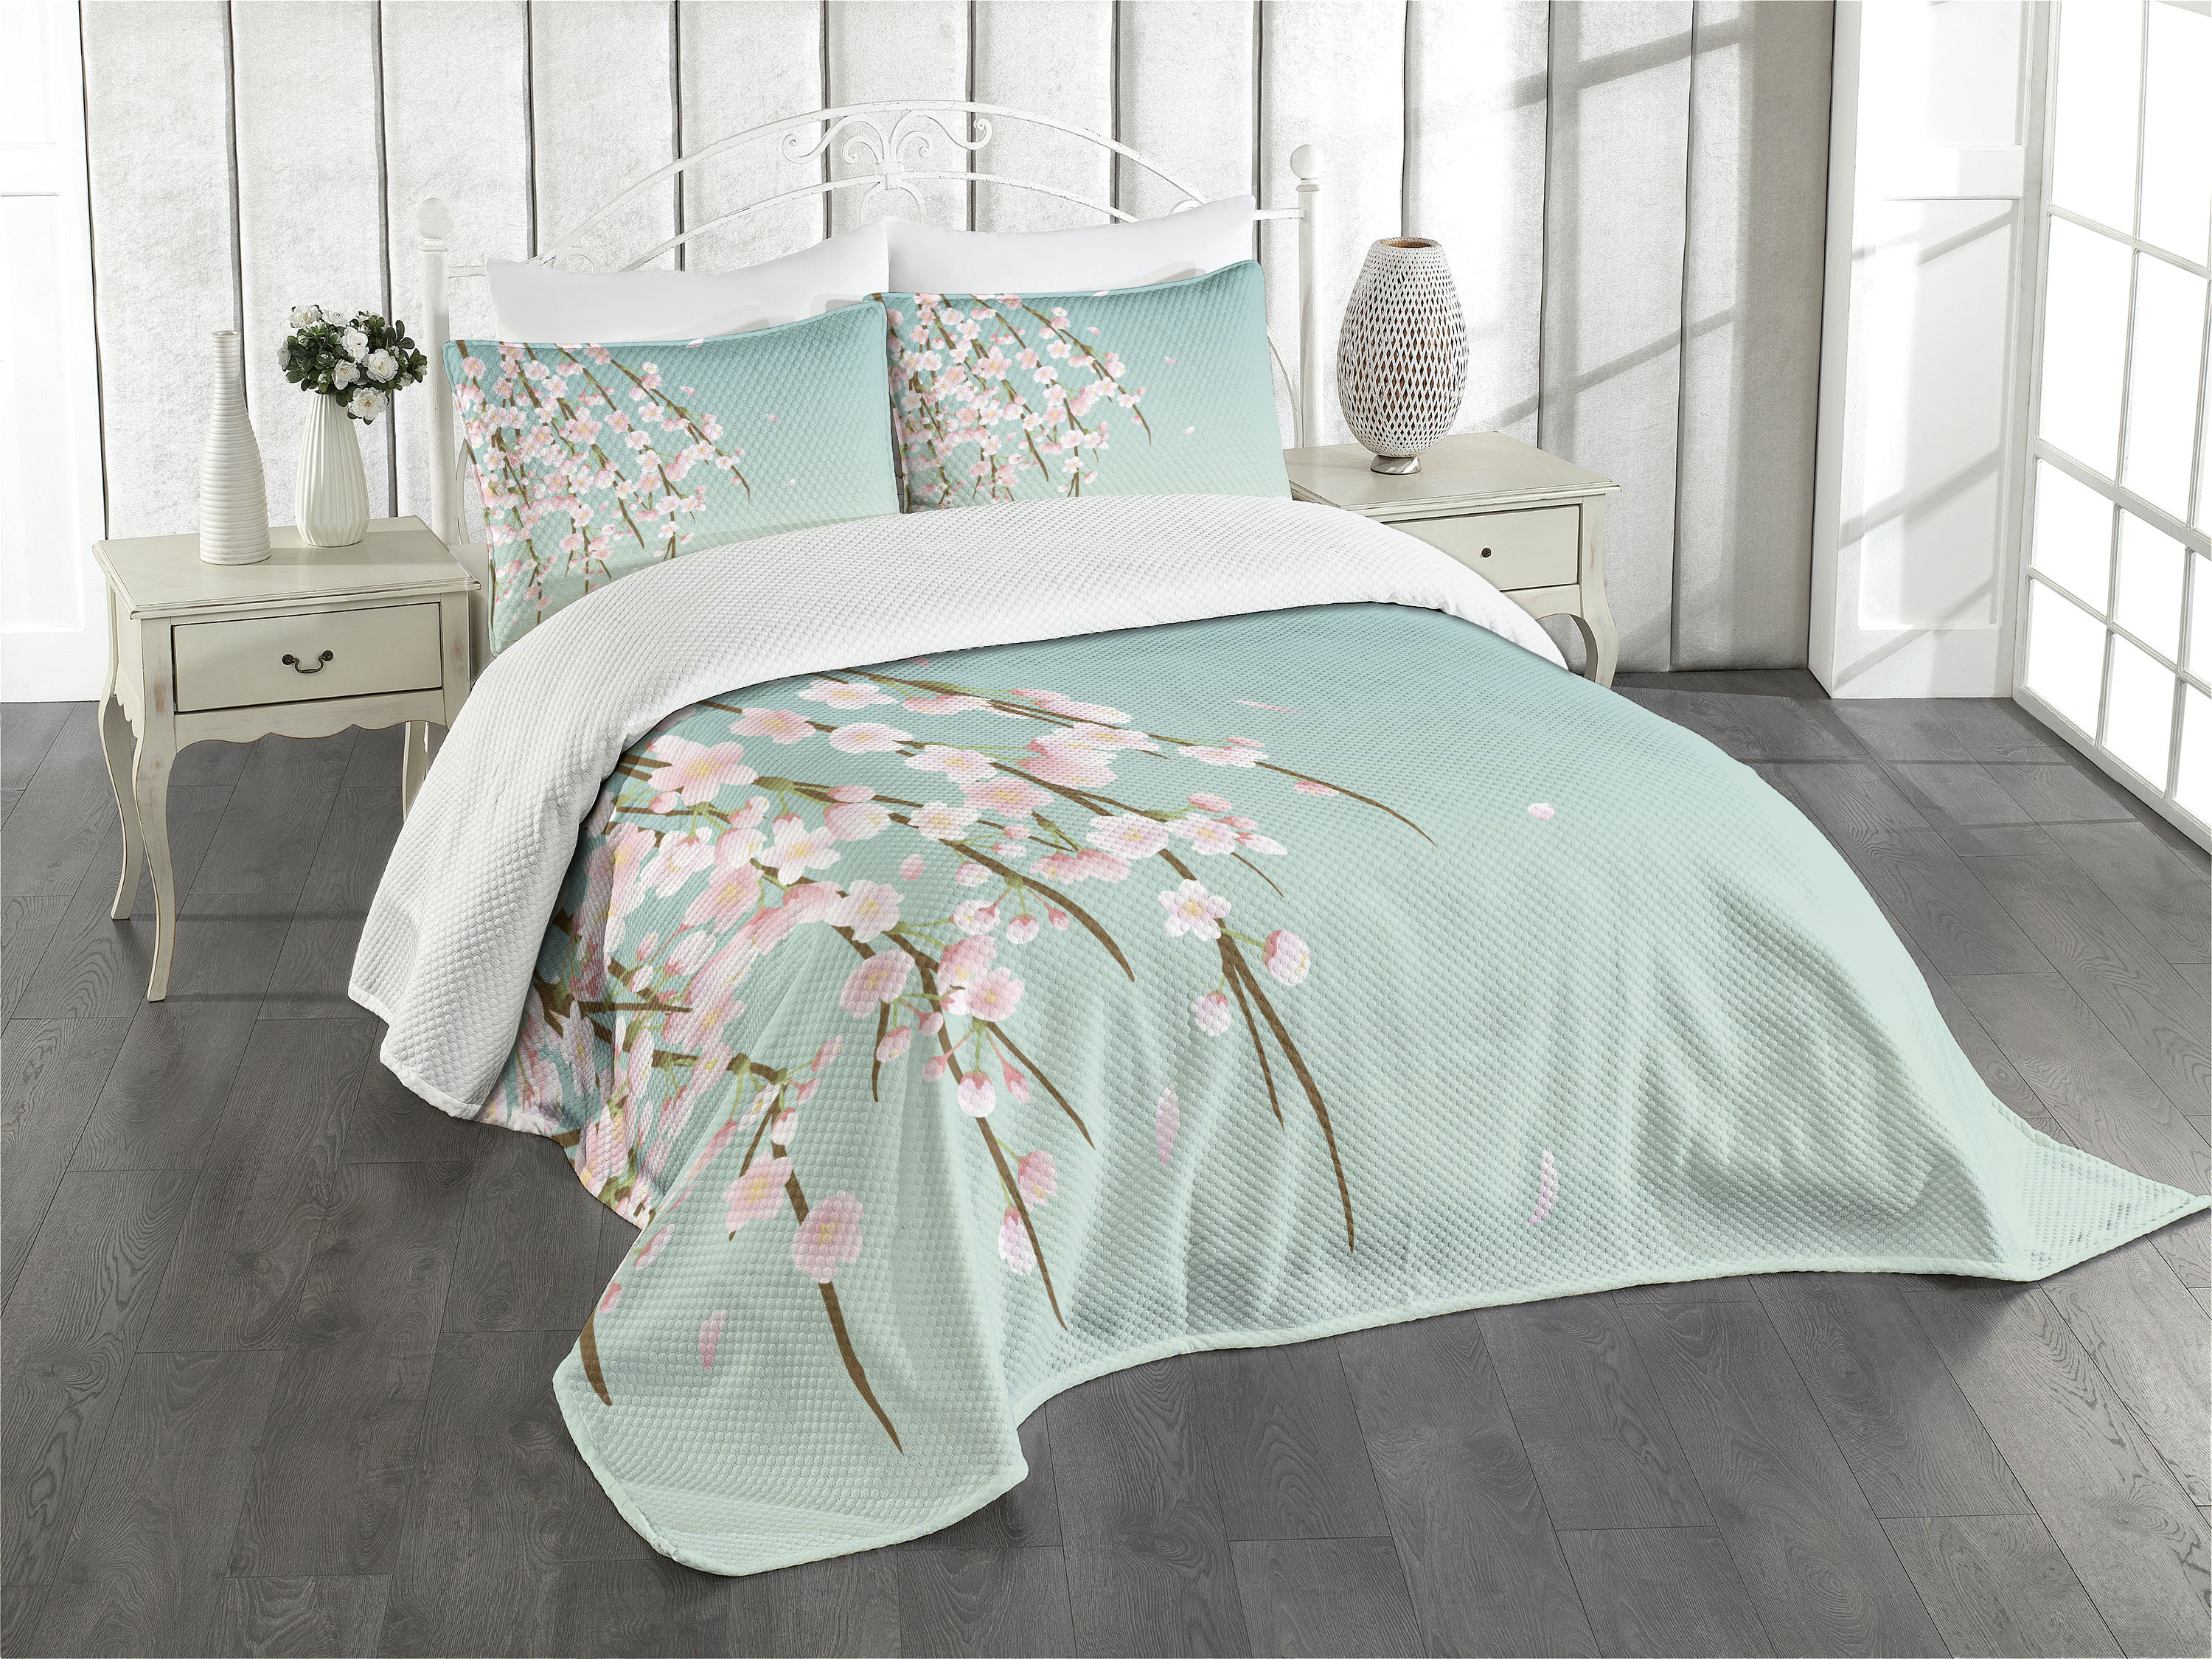 Weeping Flower Bedspread Set King Size, Freshly Blooming Cherry Blossom Branches with Flower Buds, Quilted 3 Piece Decor Coverlet Set with 2 Pillow Shams, Pale Pink Baby Blue Taupe, by Ambesonne - image 3 of 5